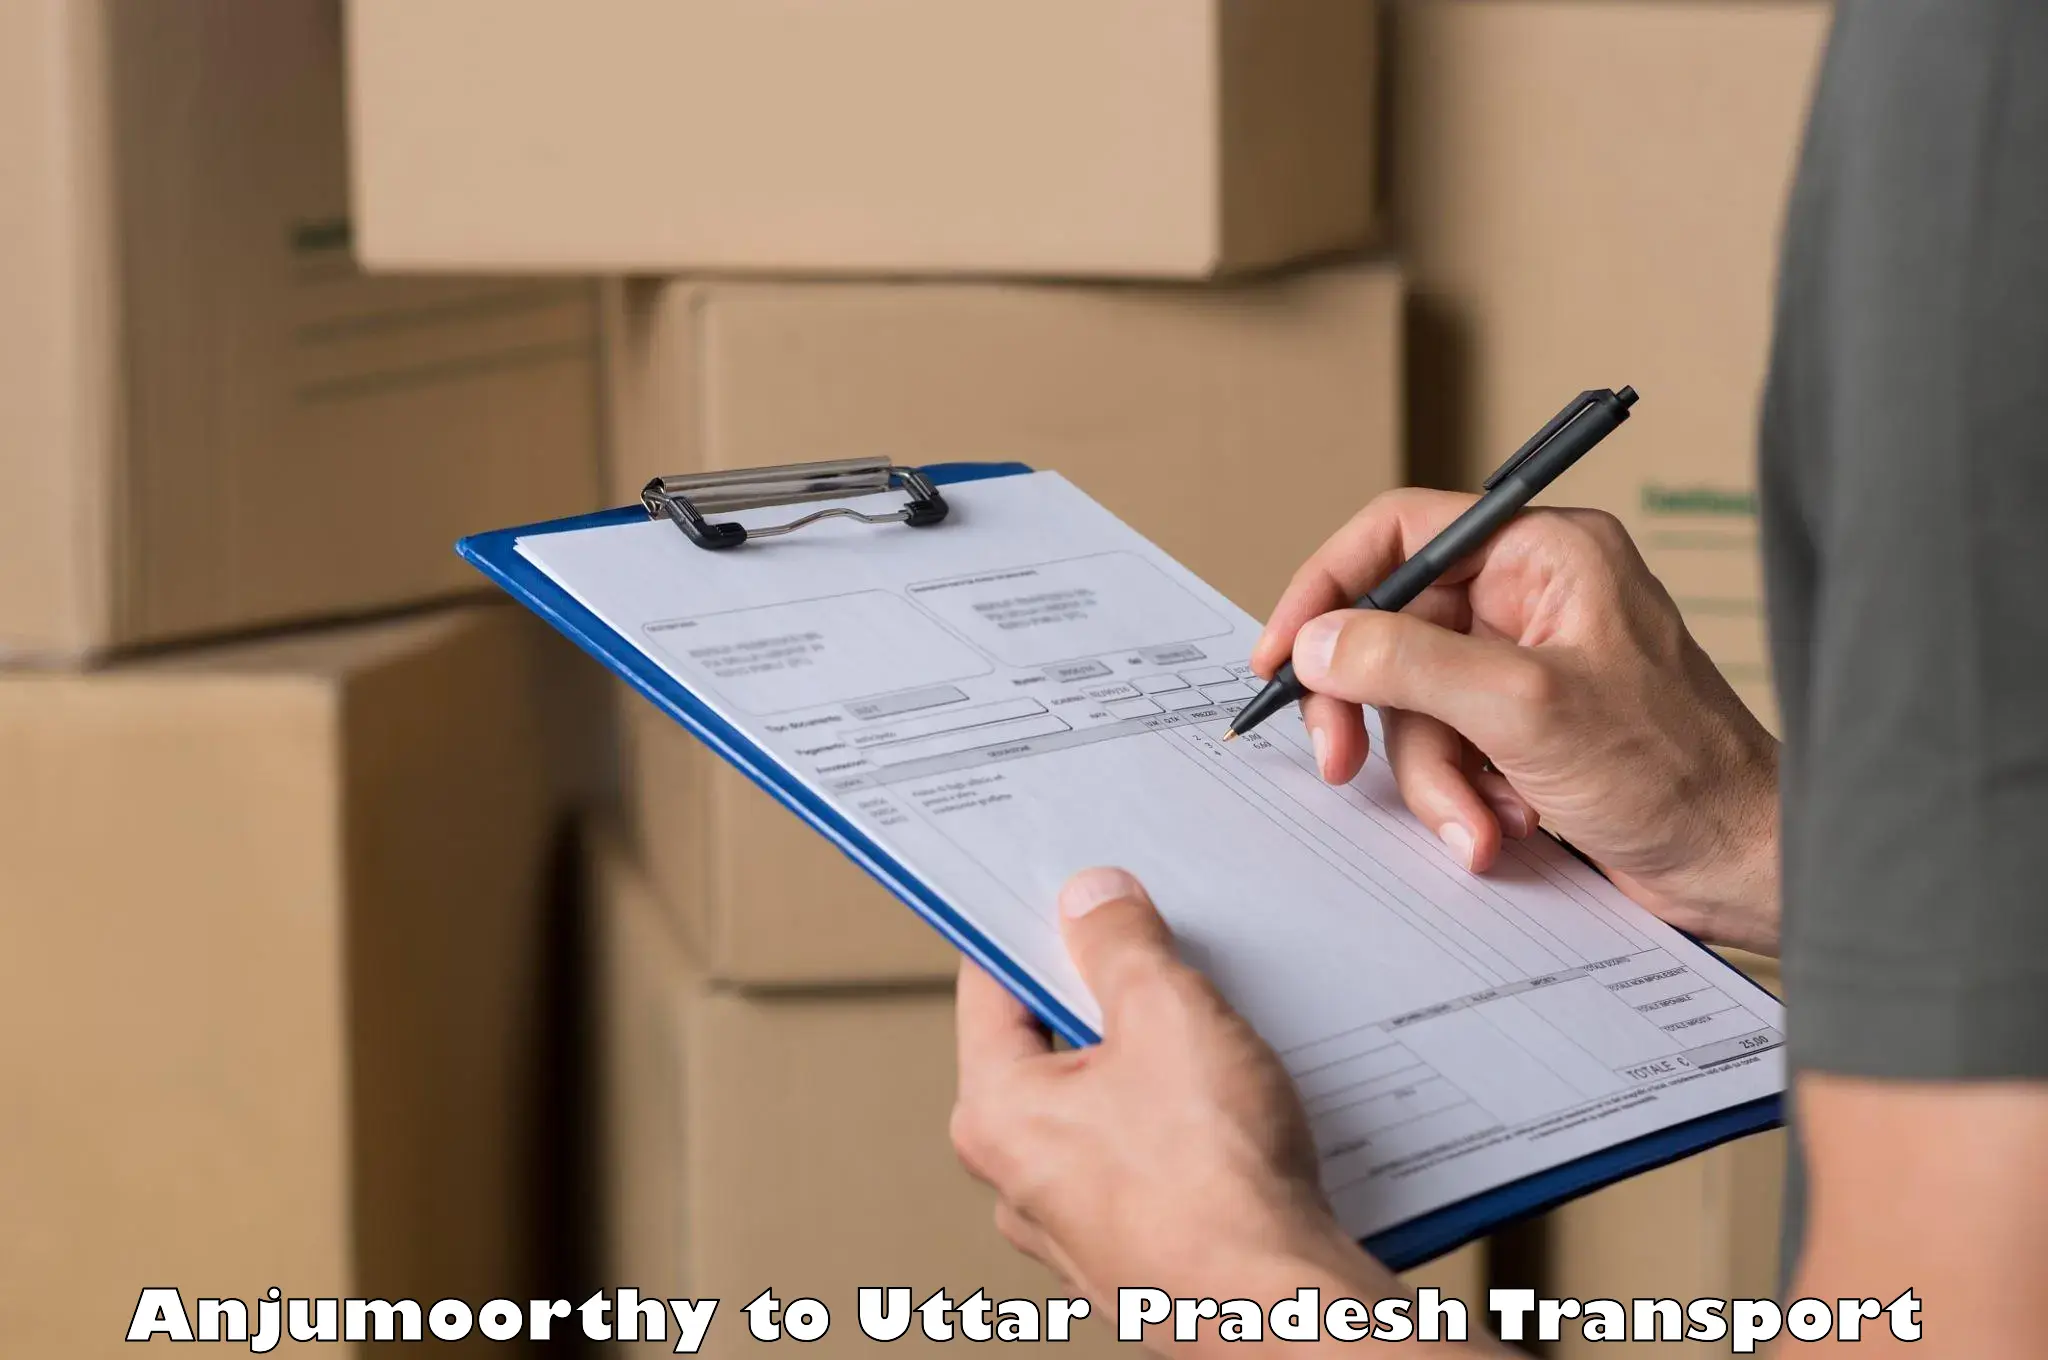 Material transport services Anjumoorthy to Agra